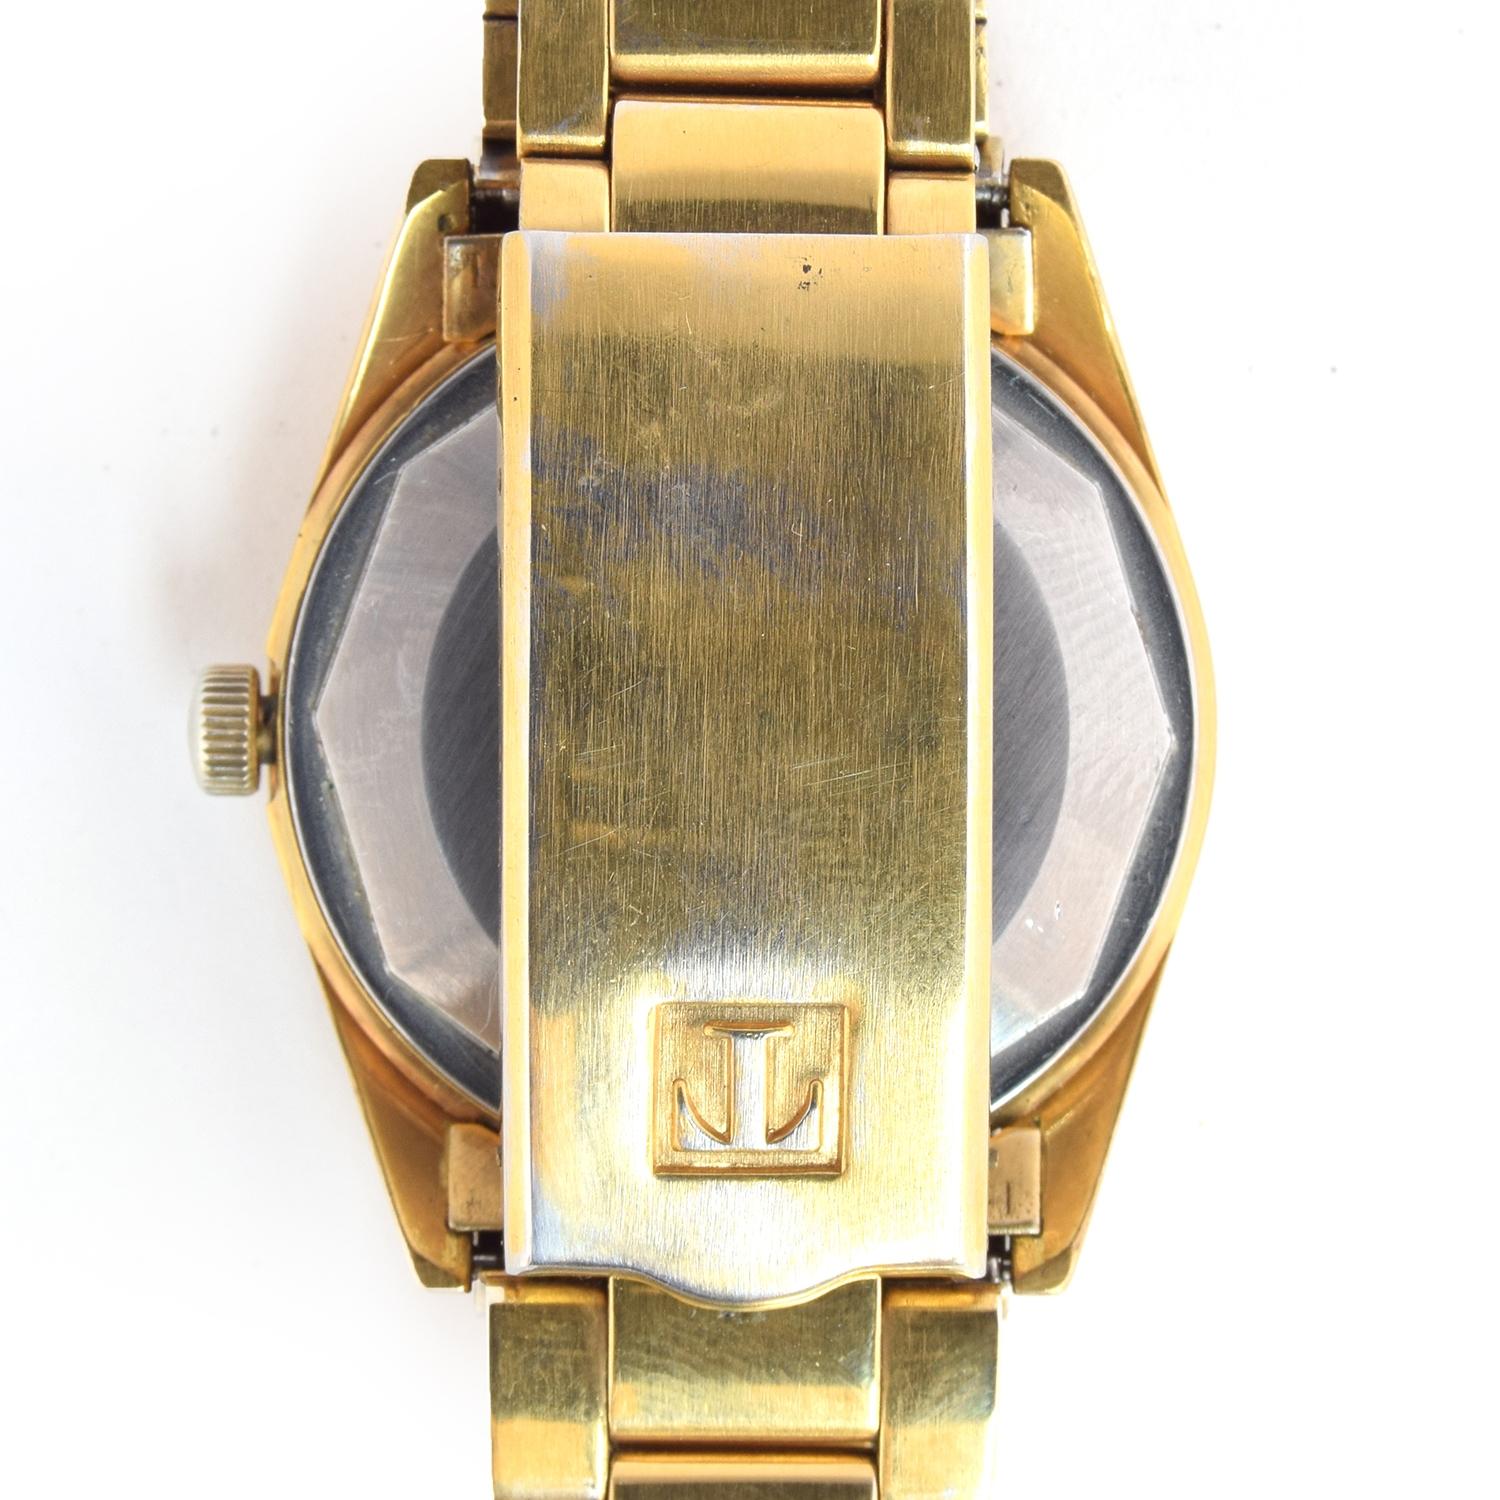 A TISSOT SEASTAR AUTOMATIC GENTLEMAN'S GOLD PLATED WRIST WATCH WITH DATE Circa 1960s, ref. 44543-1X, - Image 3 of 3